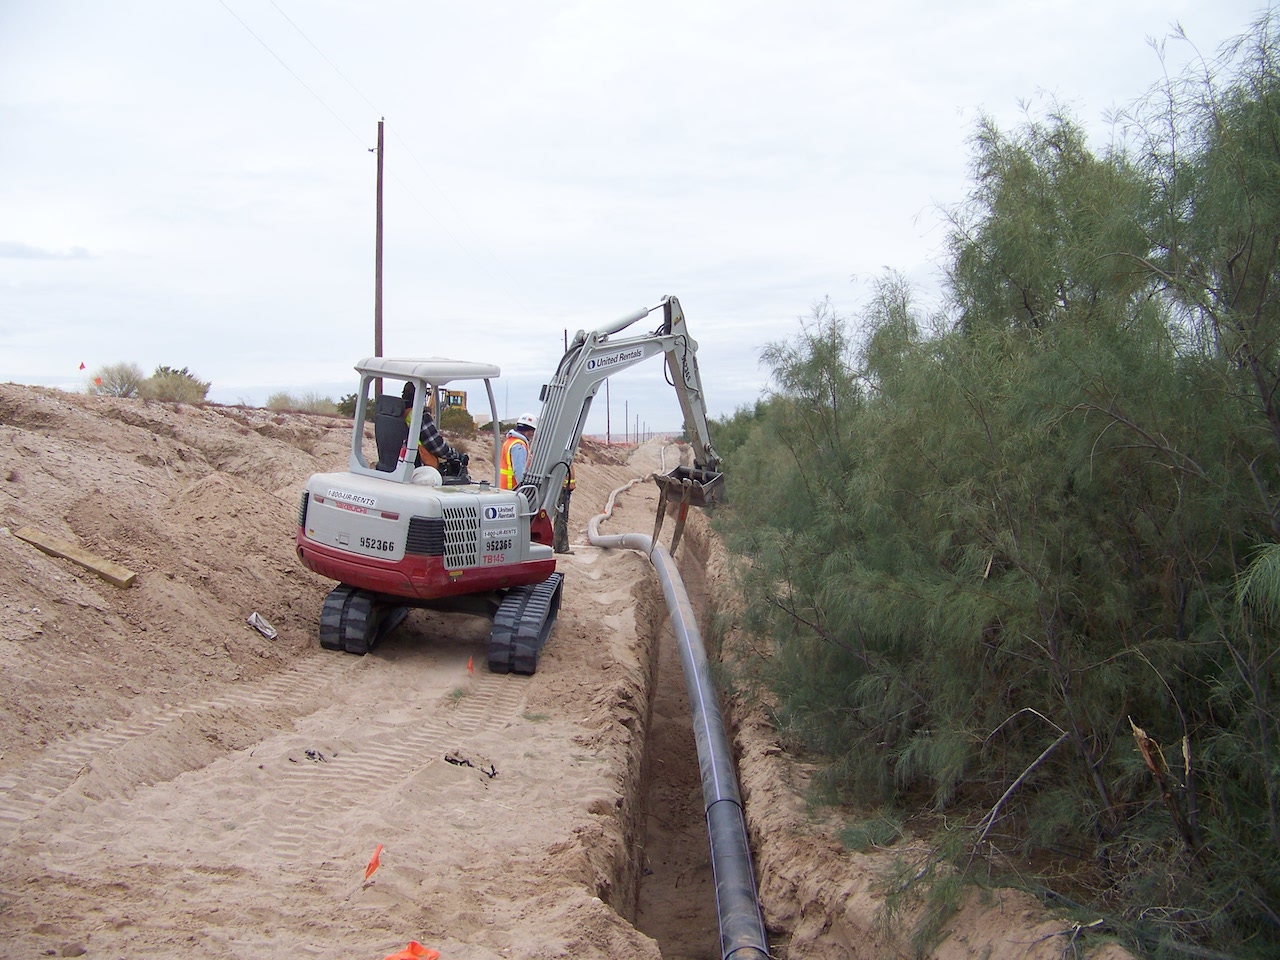 UPRR – HDPE Water Services Project - 0 